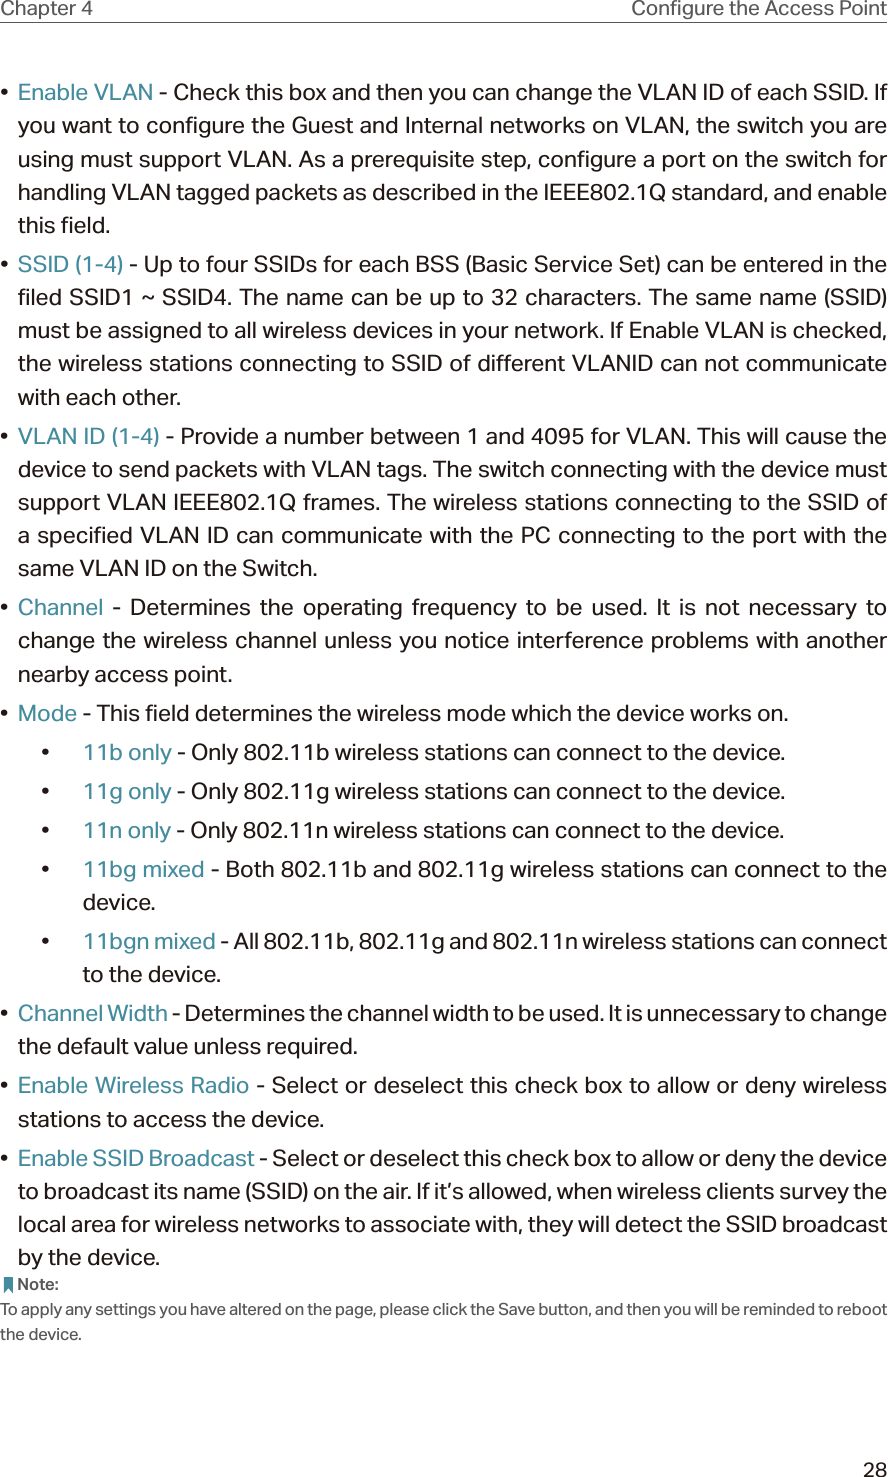 28Chapter 4 •  Enable VLAN - Check this box and then you can change the VLAN ID of each SSID. If you want to configure the Guest and Internal networks on VLAN, the switch you are using must support VLAN. As a prerequisite step, configure a port on the switch for handling VLAN tagged packets as described in the IEEE802.1Q standard, and enable this field.•  SSID (1-4) - Up to four SSIDs for each BSS (Basic Service Set) can be entered in the filed SSID1 ~ SSID4. The name can be up to 32 characters. The same name (SSID) must be assigned to all wireless devices in your network. If Enable VLAN is checked, the wireless stations connecting to SSID of different VLANID can not communicate with each other.•  VLAN ID (1-4) - Provide a number between 1 and 4095 for VLAN. This will cause the device to send packets with VLAN tags. The switch connecting with the device must support VLAN IEEE802.1Q frames. The wireless stations connecting to the SSID of a specified VLAN ID can communicate with the PC connecting to the port with the same VLAN ID on the Switch.•  Channel - Determines the operating frequency to be used. It is not necessary to change the wireless channel unless you notice interference problems with another nearby access point.•  Mode - This field determines the wireless mode which the device works on.•  11b only - Only 802.11b wireless stations can connect to the device.•  11g only - Only 802.11g wireless stations can connect to the device.•  11n only - Only 802.11n wireless stations can connect to the device.•  11bg mixed - Both 802.11b and 802.11g wireless stations can connect to the device.•  11bgn mixed - All 802.11b, 802.11g and 802.11n wireless stations can connect to the device.•  Channel Width - Determines the channel width to be used. It is unnecessary to change the default value unless required.•  Enable Wireless Radio - Select or deselect this check box to allow or deny wireless stations to access the device. •  Enable SSID Broadcast - Select or deselect this check box to allow or deny the device to broadcast its name (SSID) on the air. If it’s allowed, when wireless clients survey the local area for wireless networks to associate with, they will detect the SSID broadcast by the device.  Note:To apply any settings you have altered on the page, please click the Save button, and then you will be reminded to reboot the device.